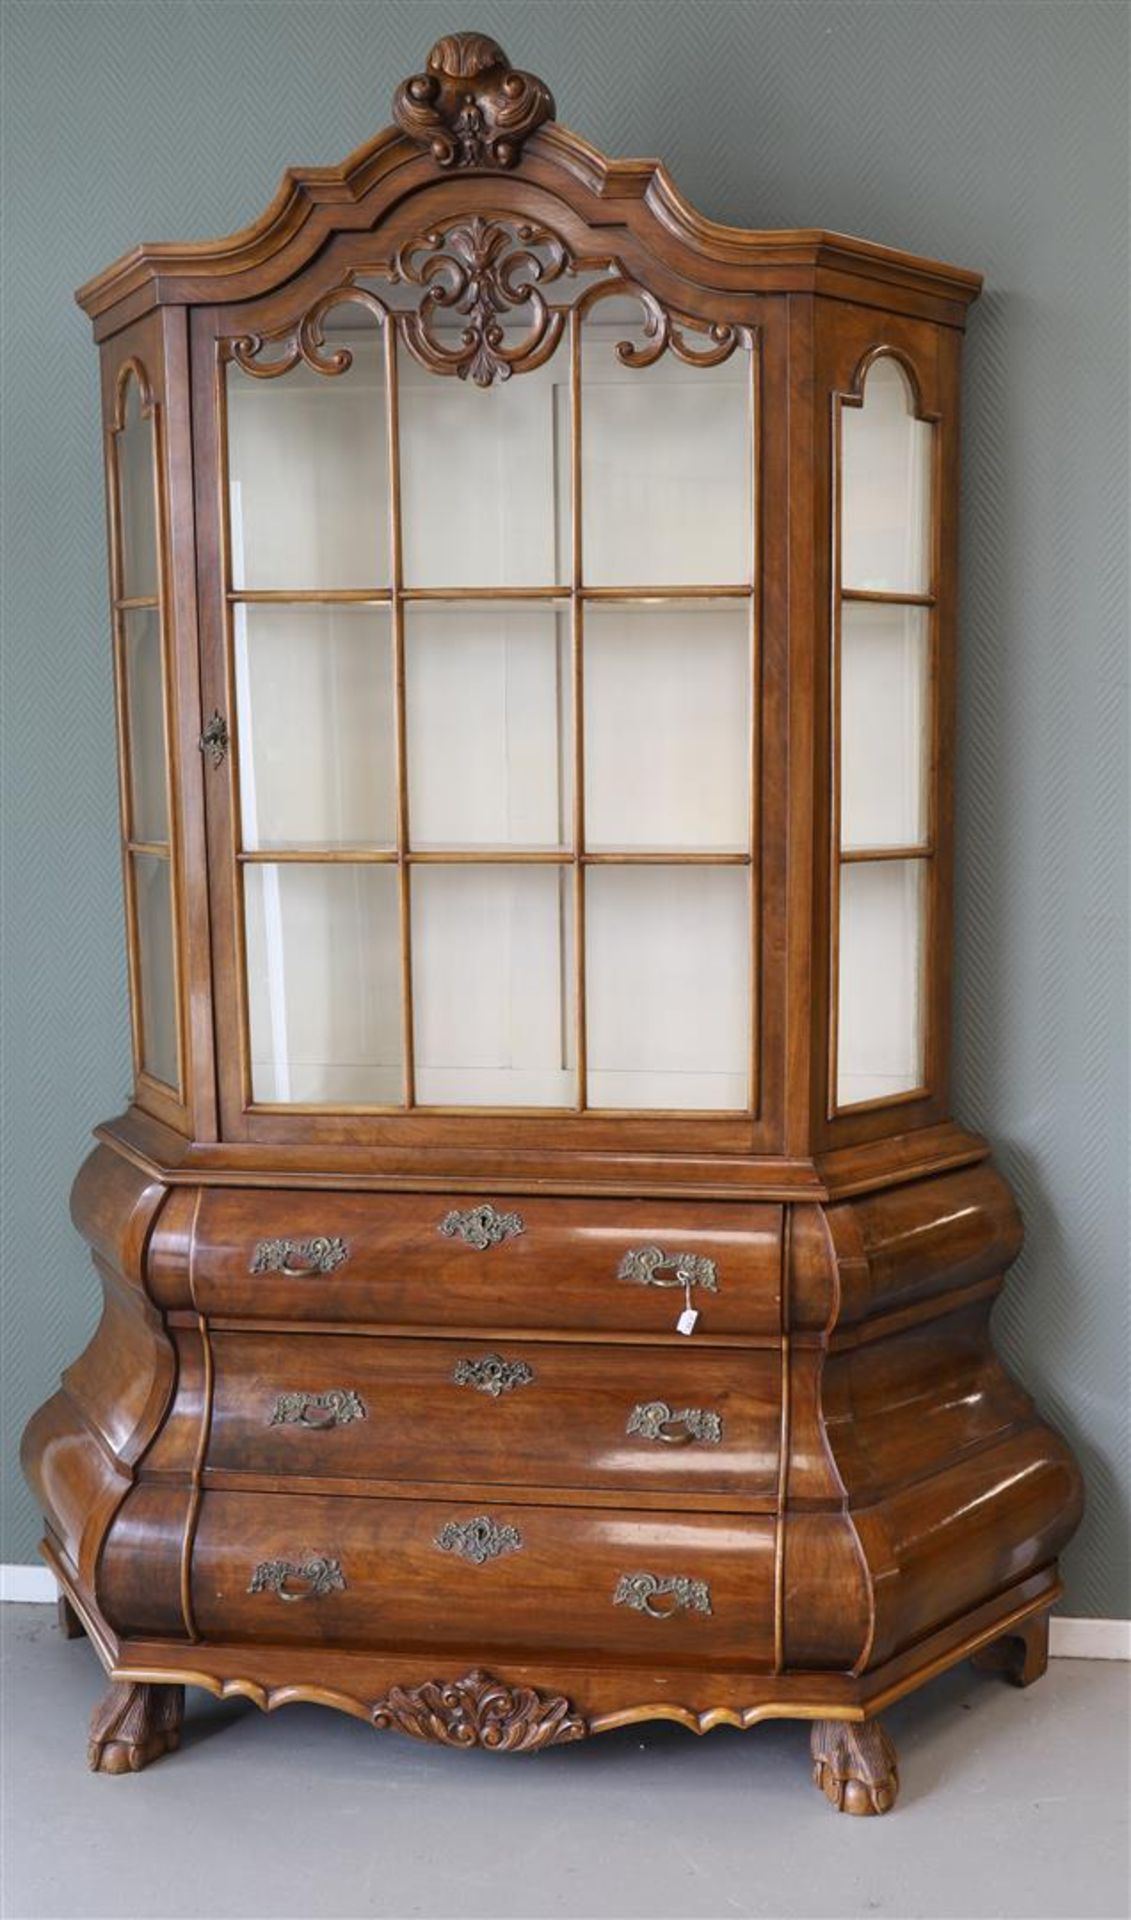 A one-door porcelain/display cabinet, Dutch, Louis Quinze style, 20th century.